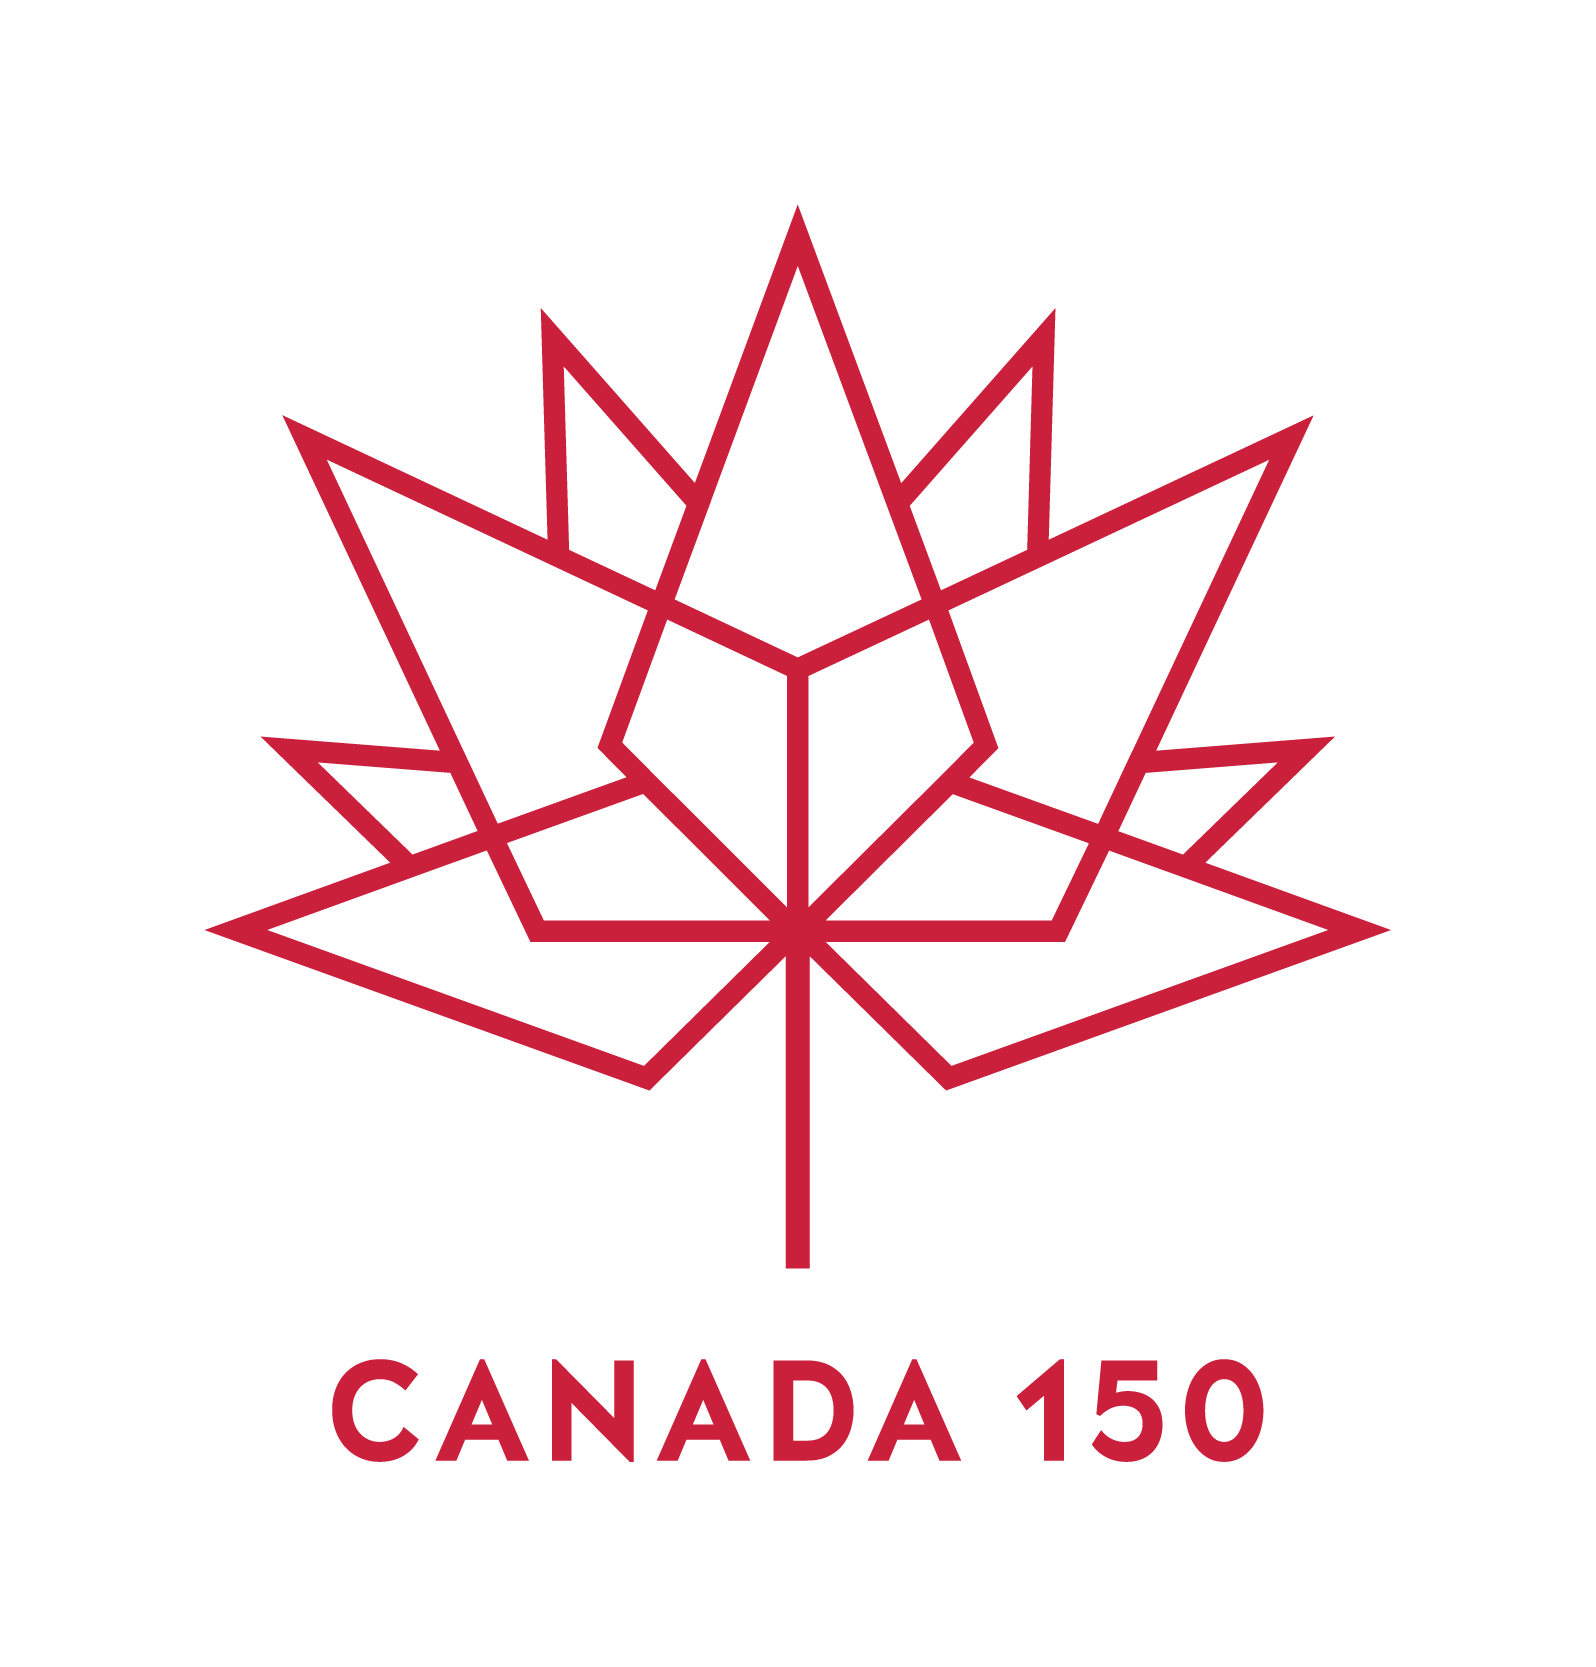 Getting in on Canada150 with Custom Printed Products